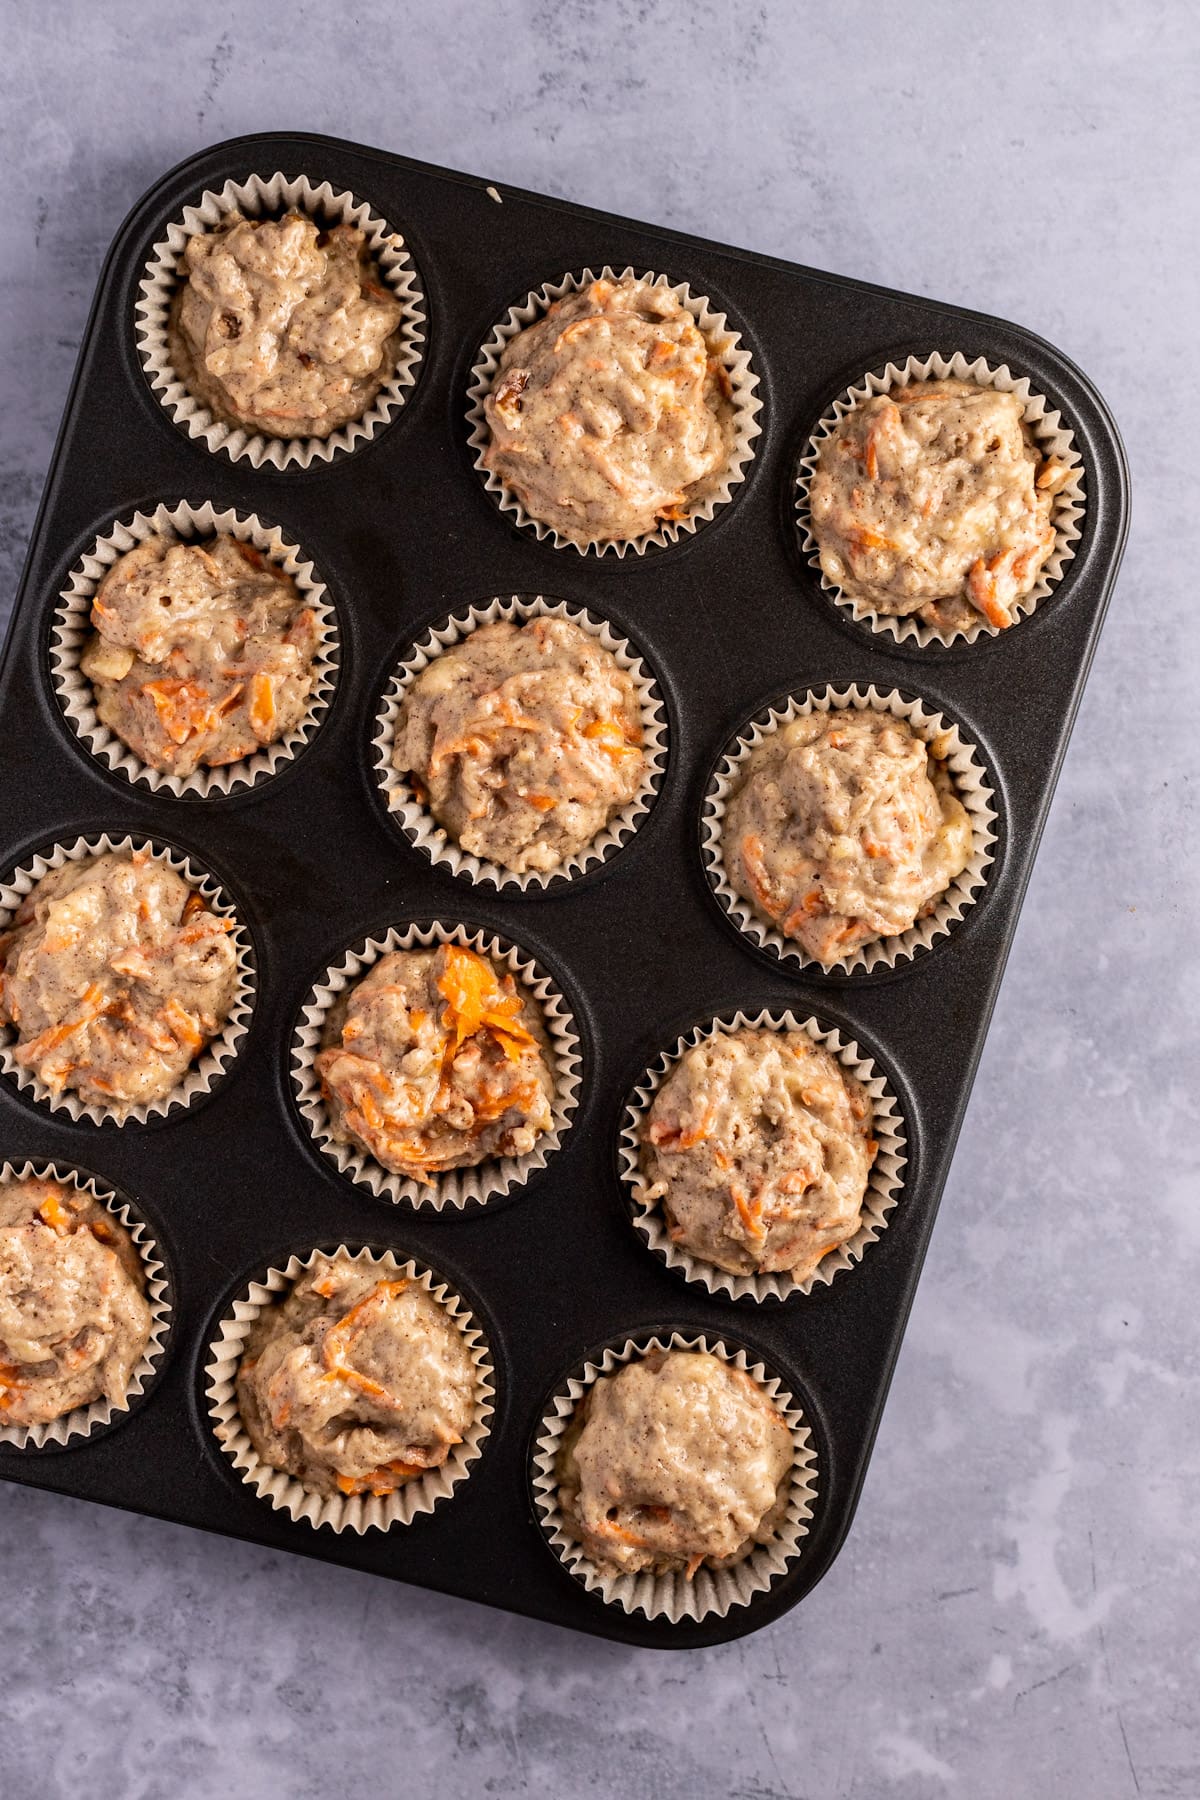 A muffin tray on a grey background, filled with muffin liners that have been filled with muffin batter.